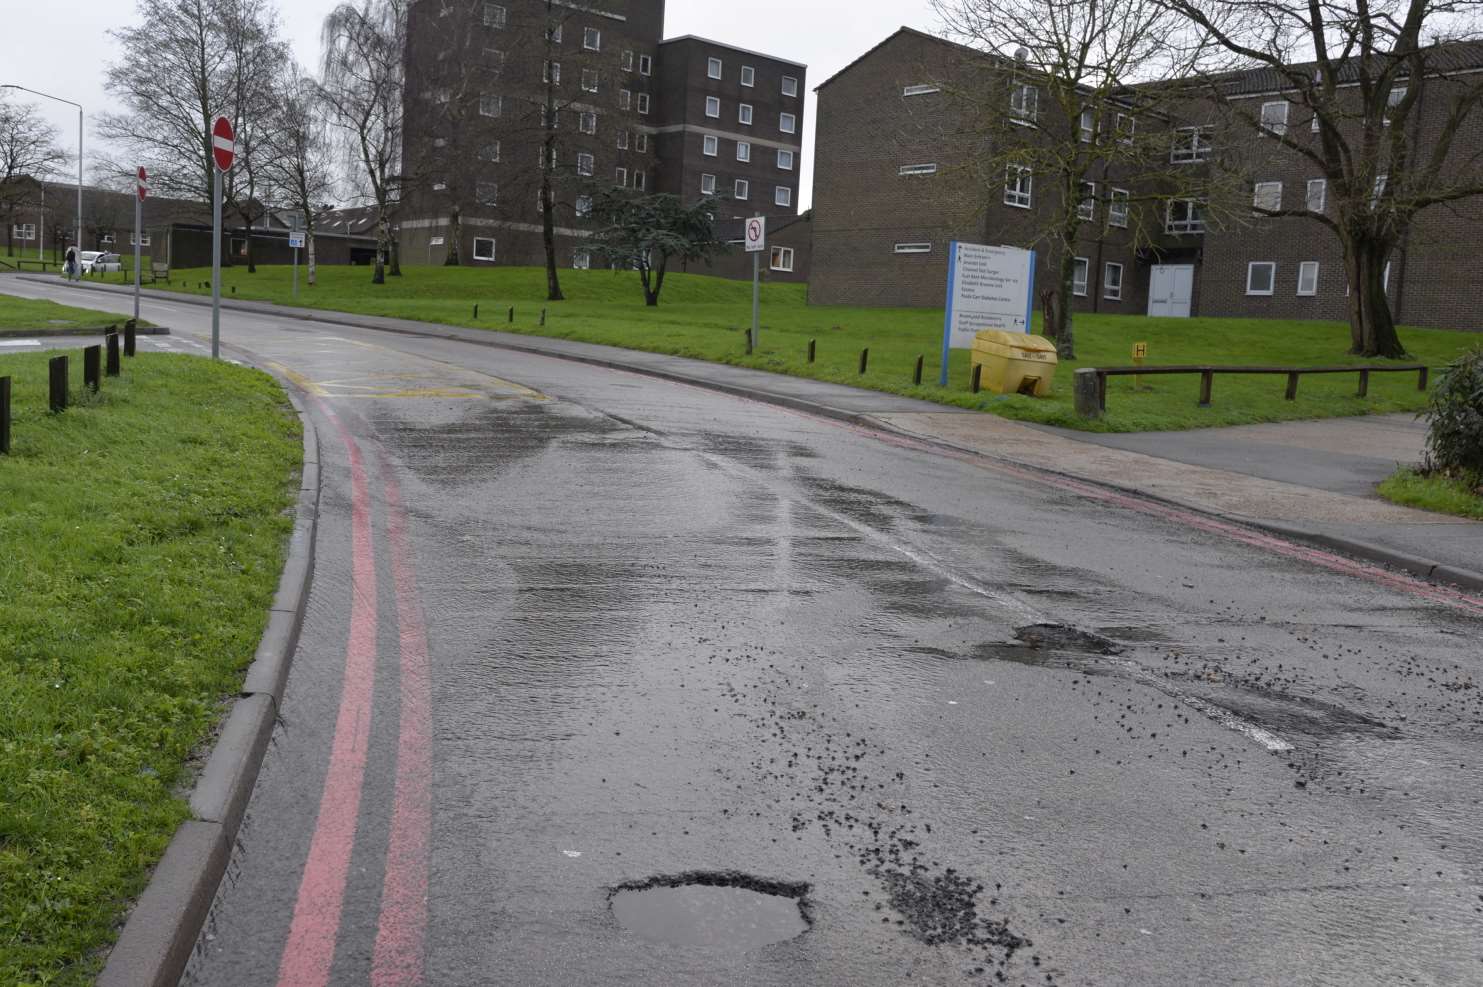 Stagecoach buses have been warned not to use the collapsing road